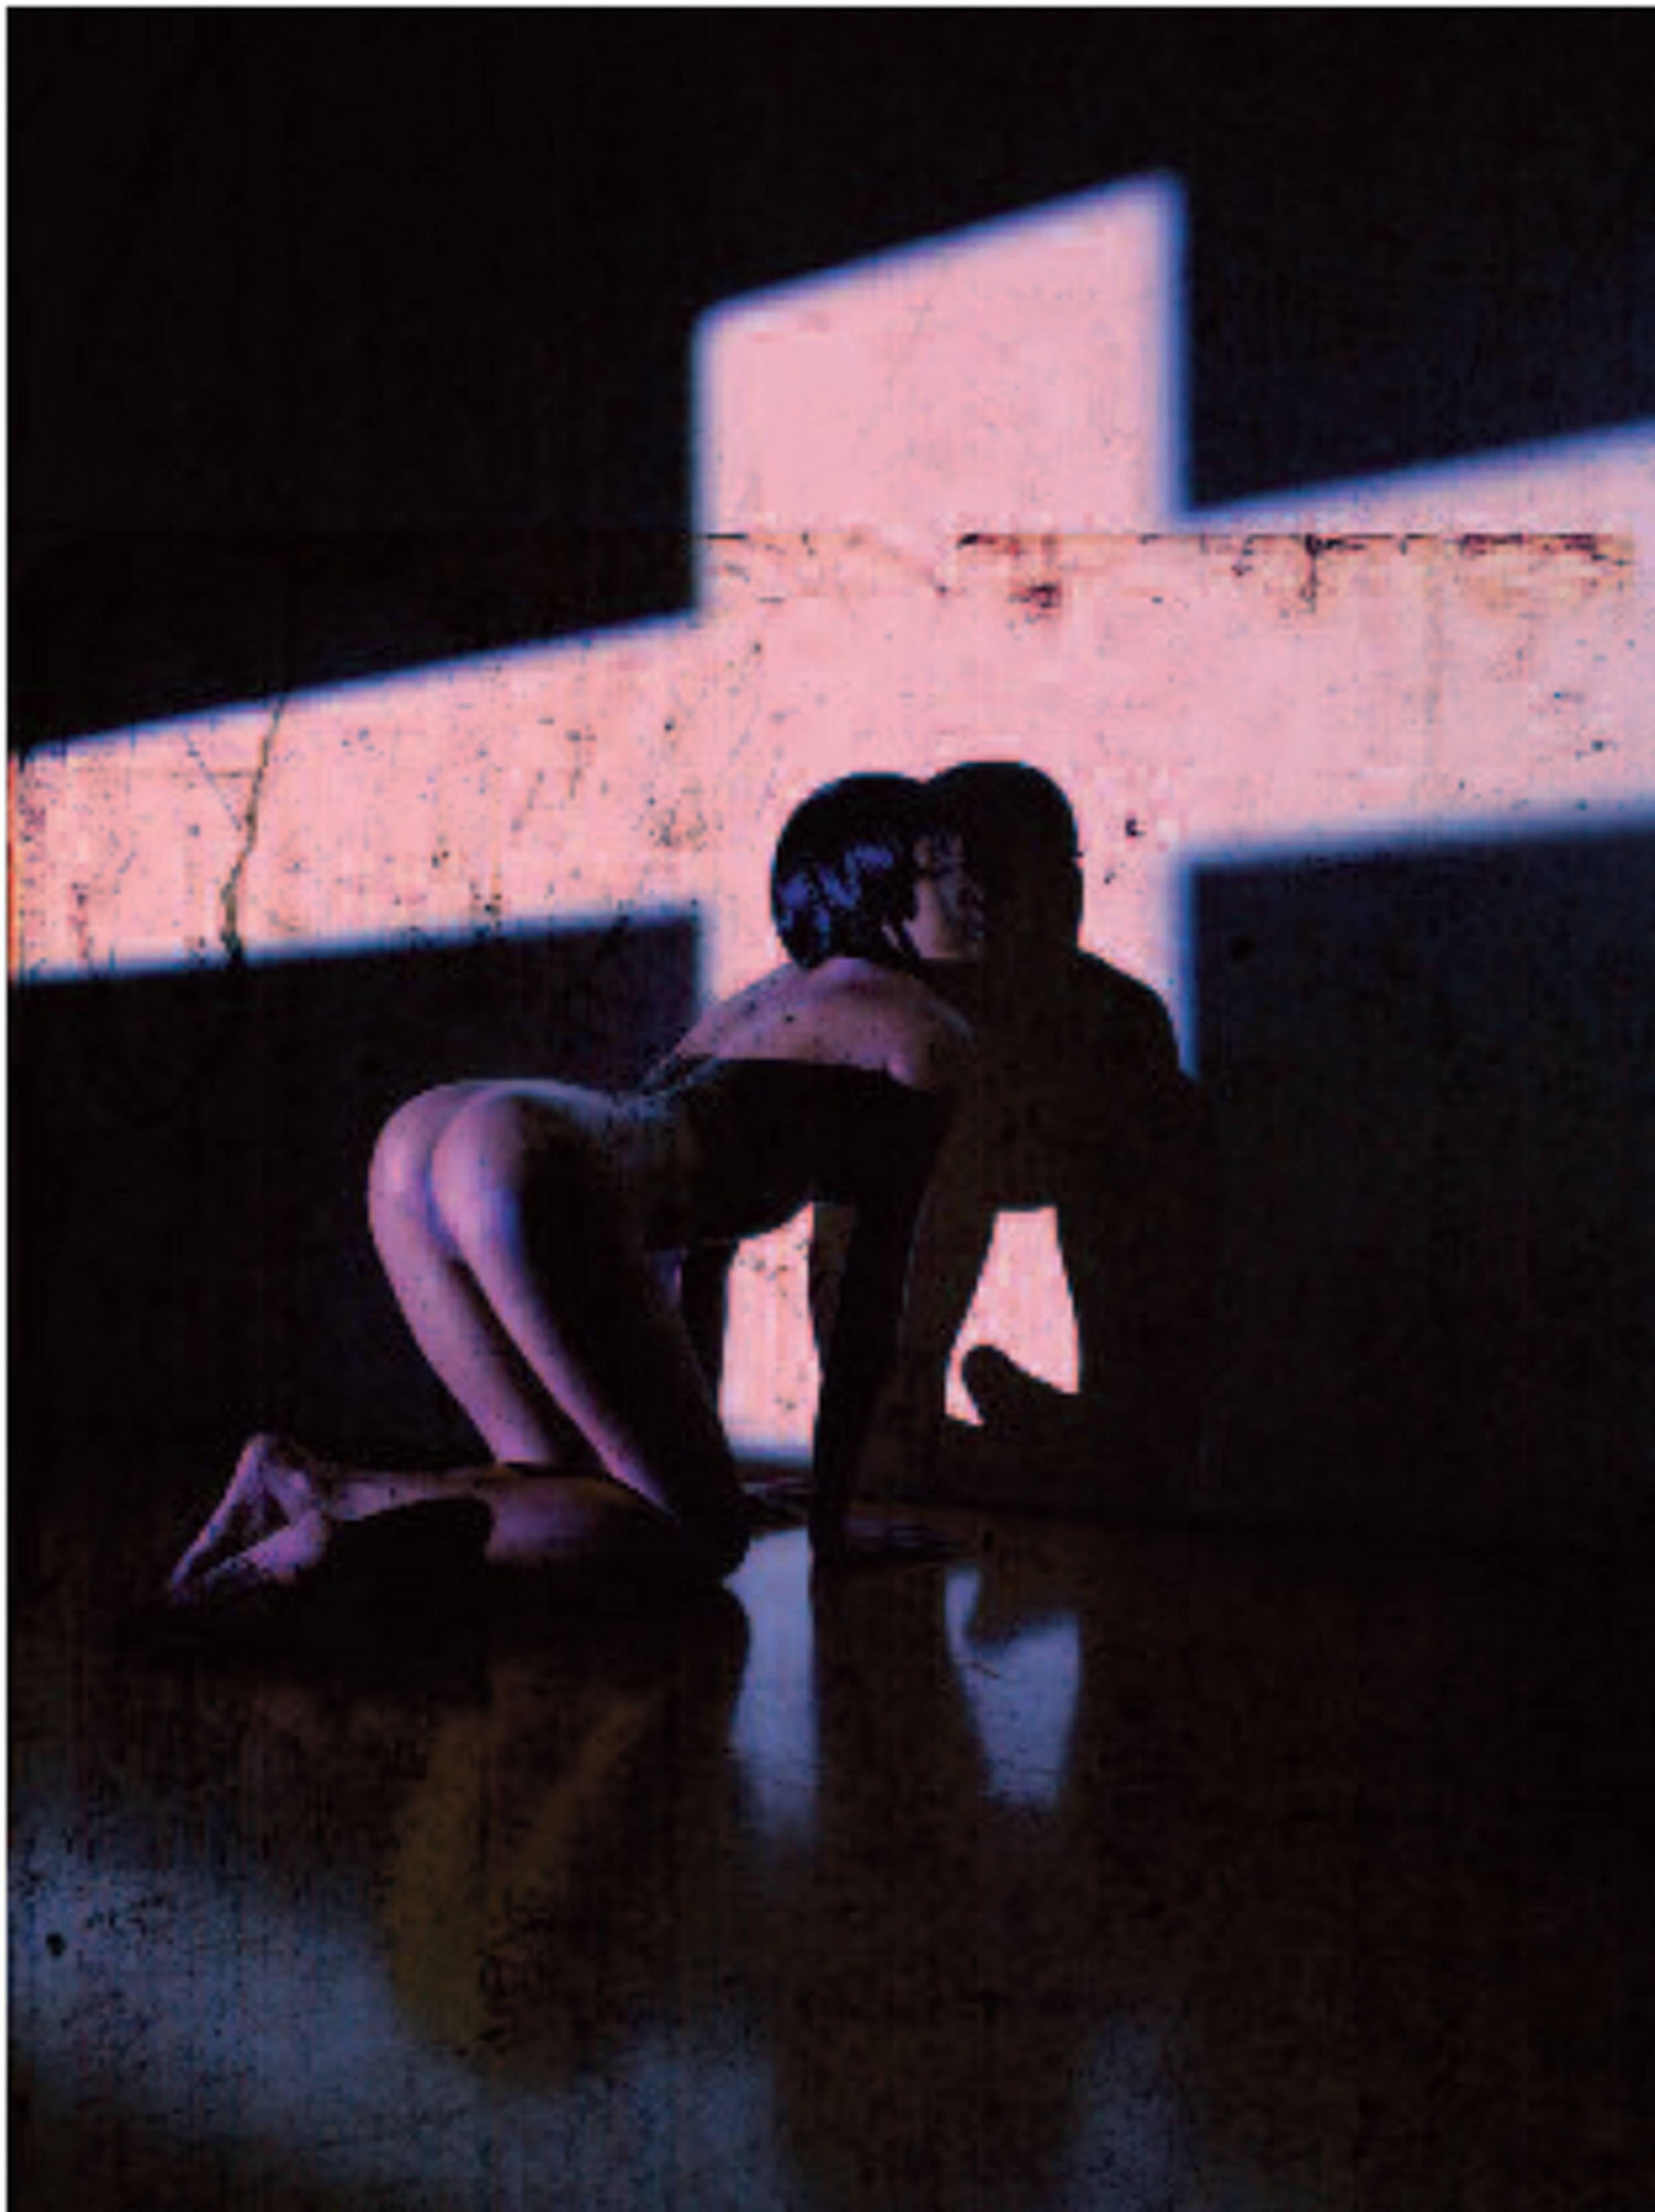 Andreas H. Bitesnich Color Photograph - Erotic Nude 3793 - kneeling with pink light, fine art photography, 2010